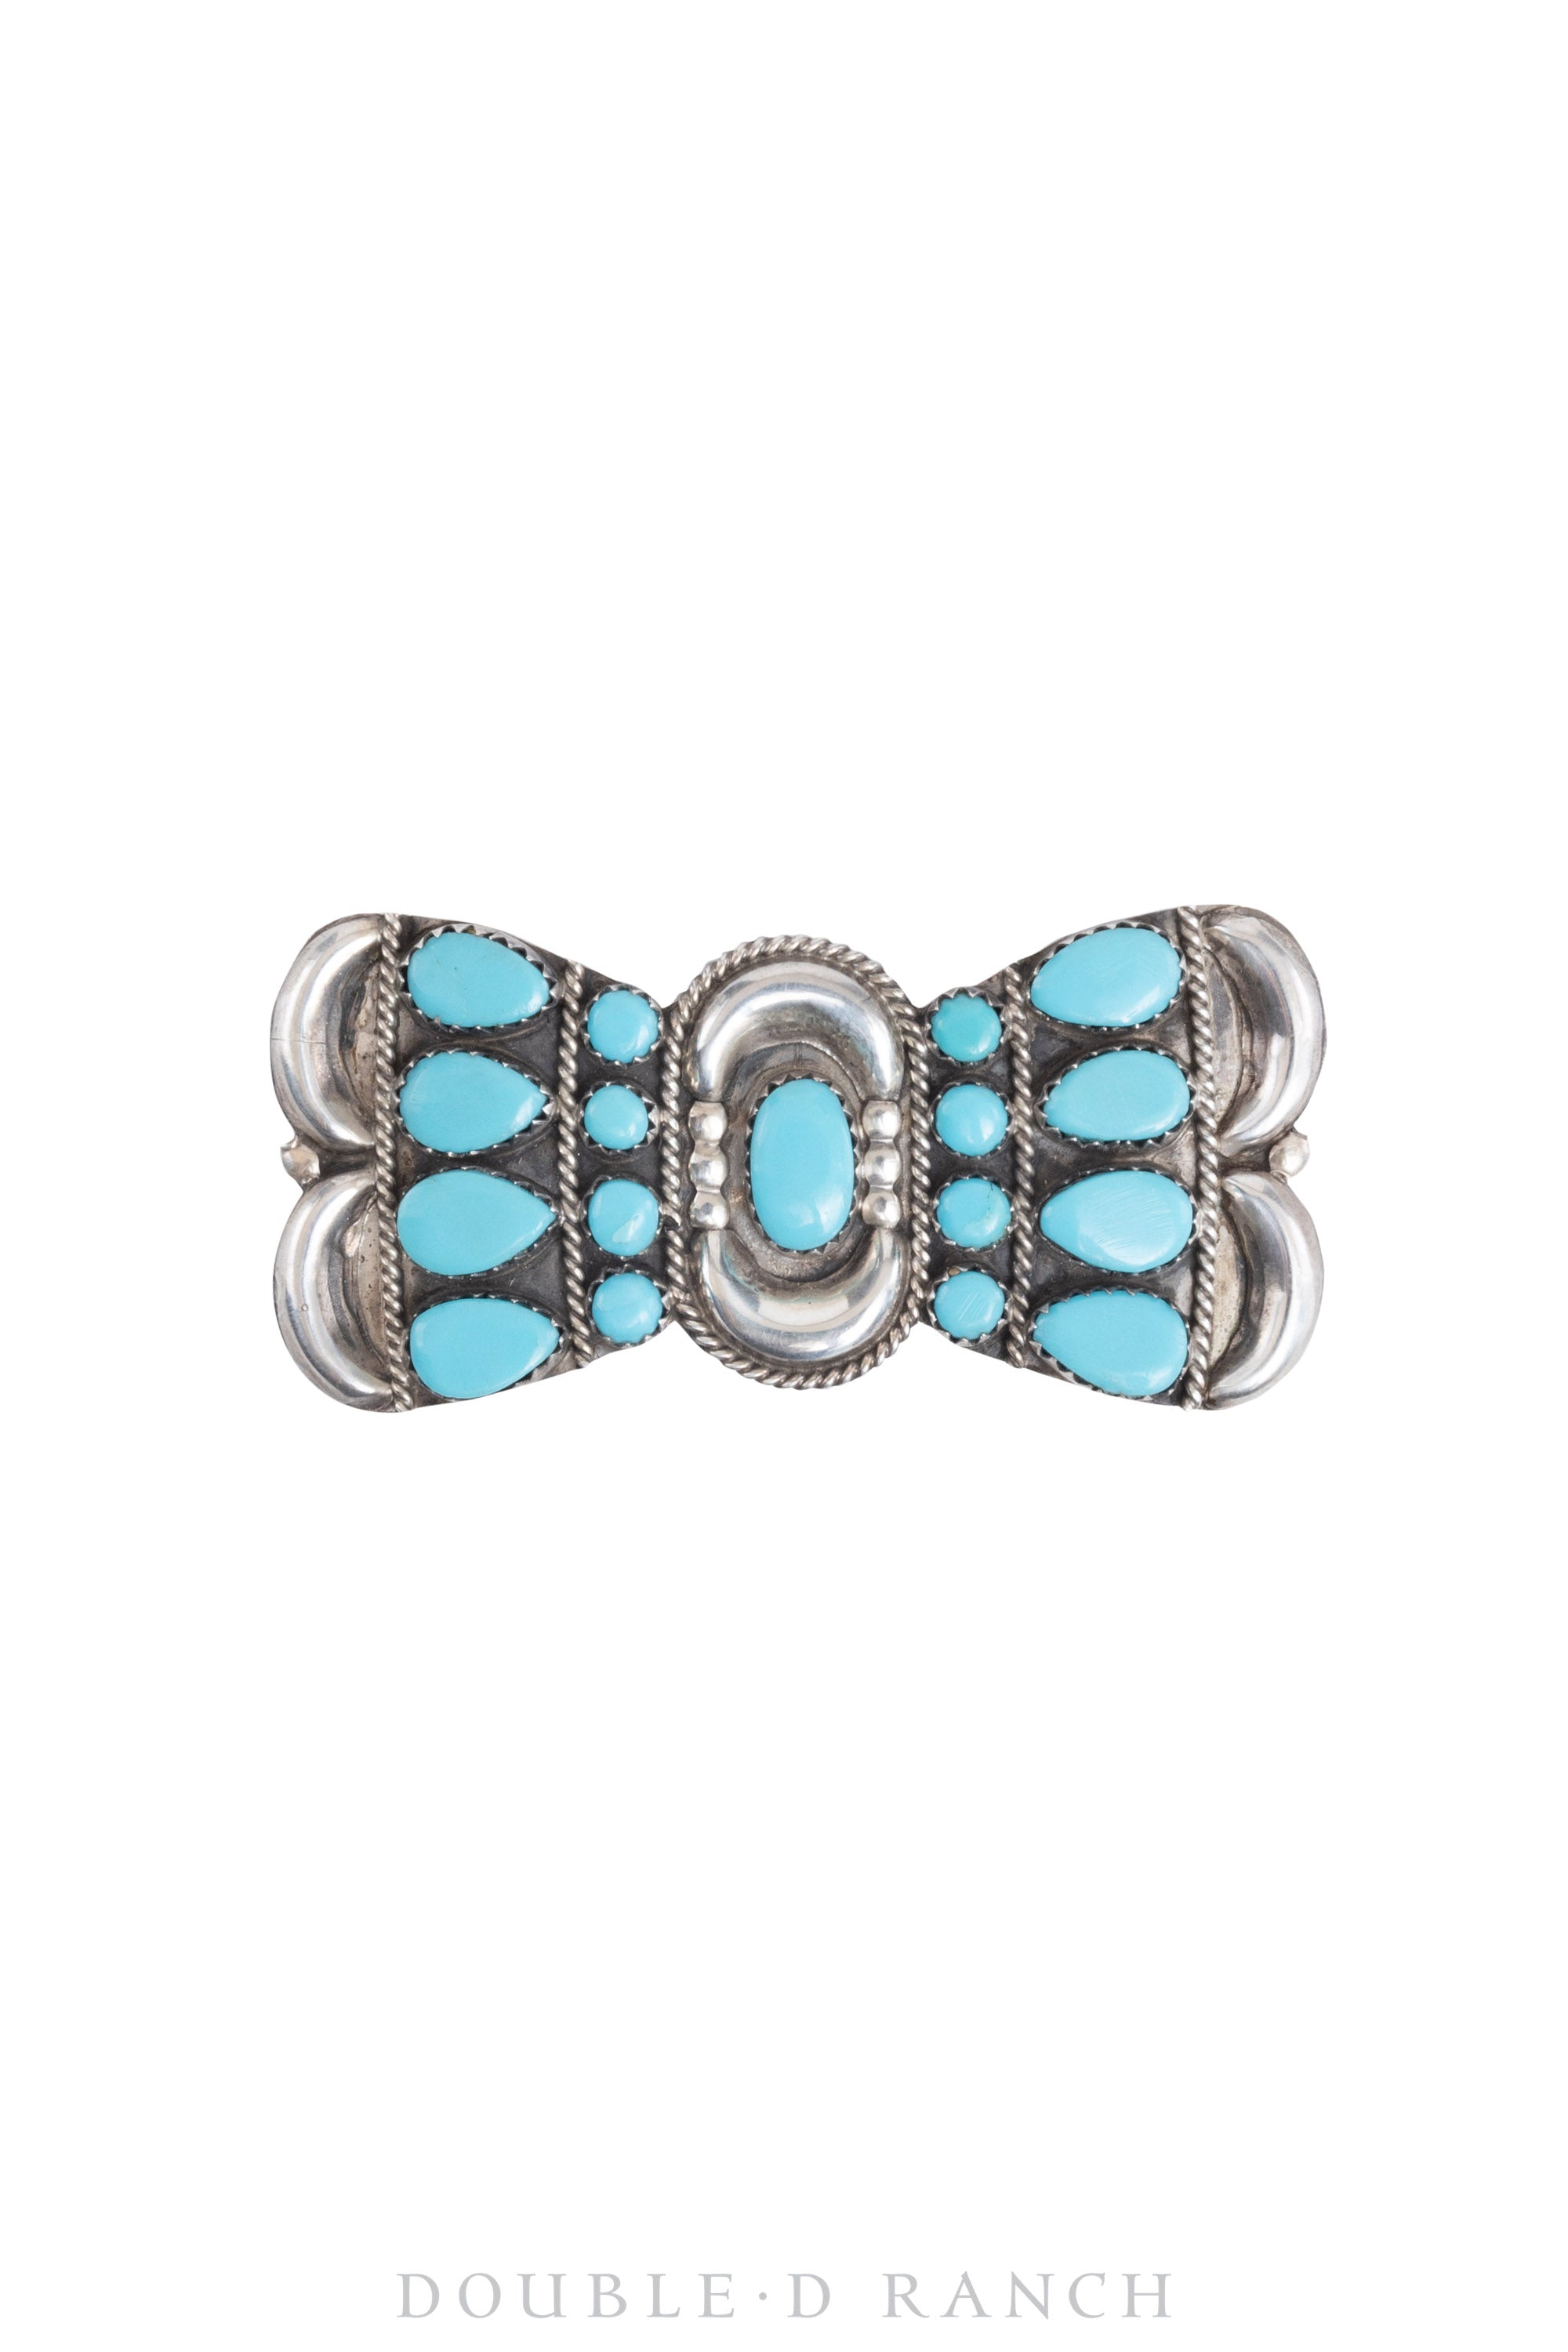 Pin, Cluster, Bowtie, Turquoise, Vintage, 907